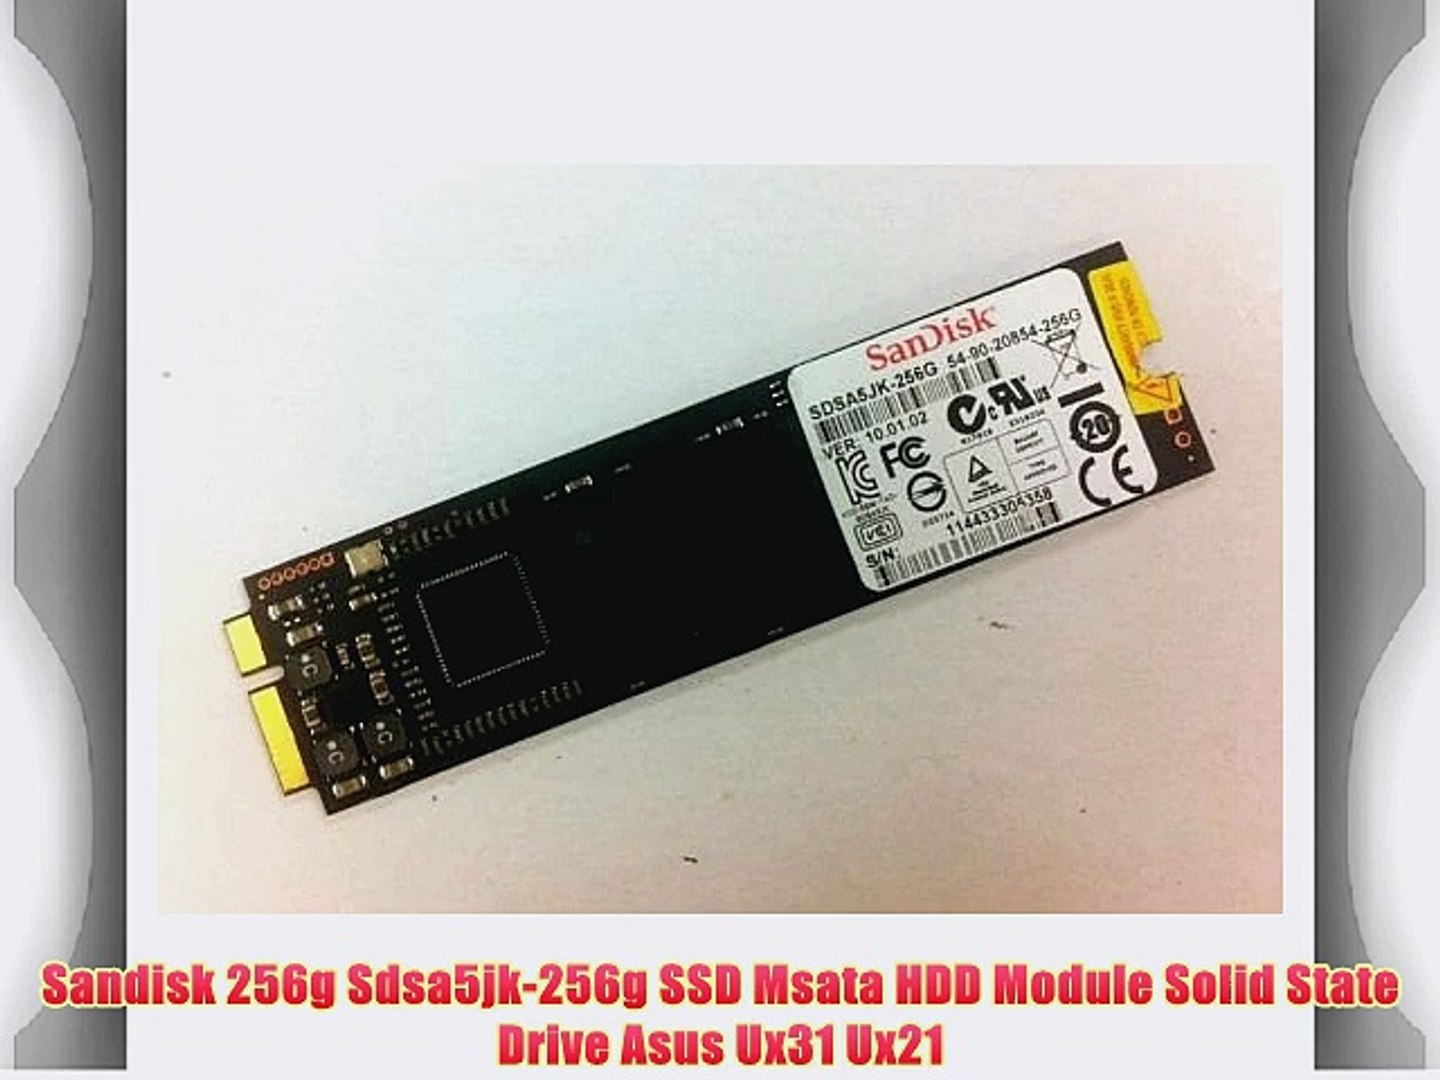 Sandisk 256g Sdsa5jk-256g SSD Msata HDD Module Solid State Drive Asus Ux31  Ux21 - video Dailymotion